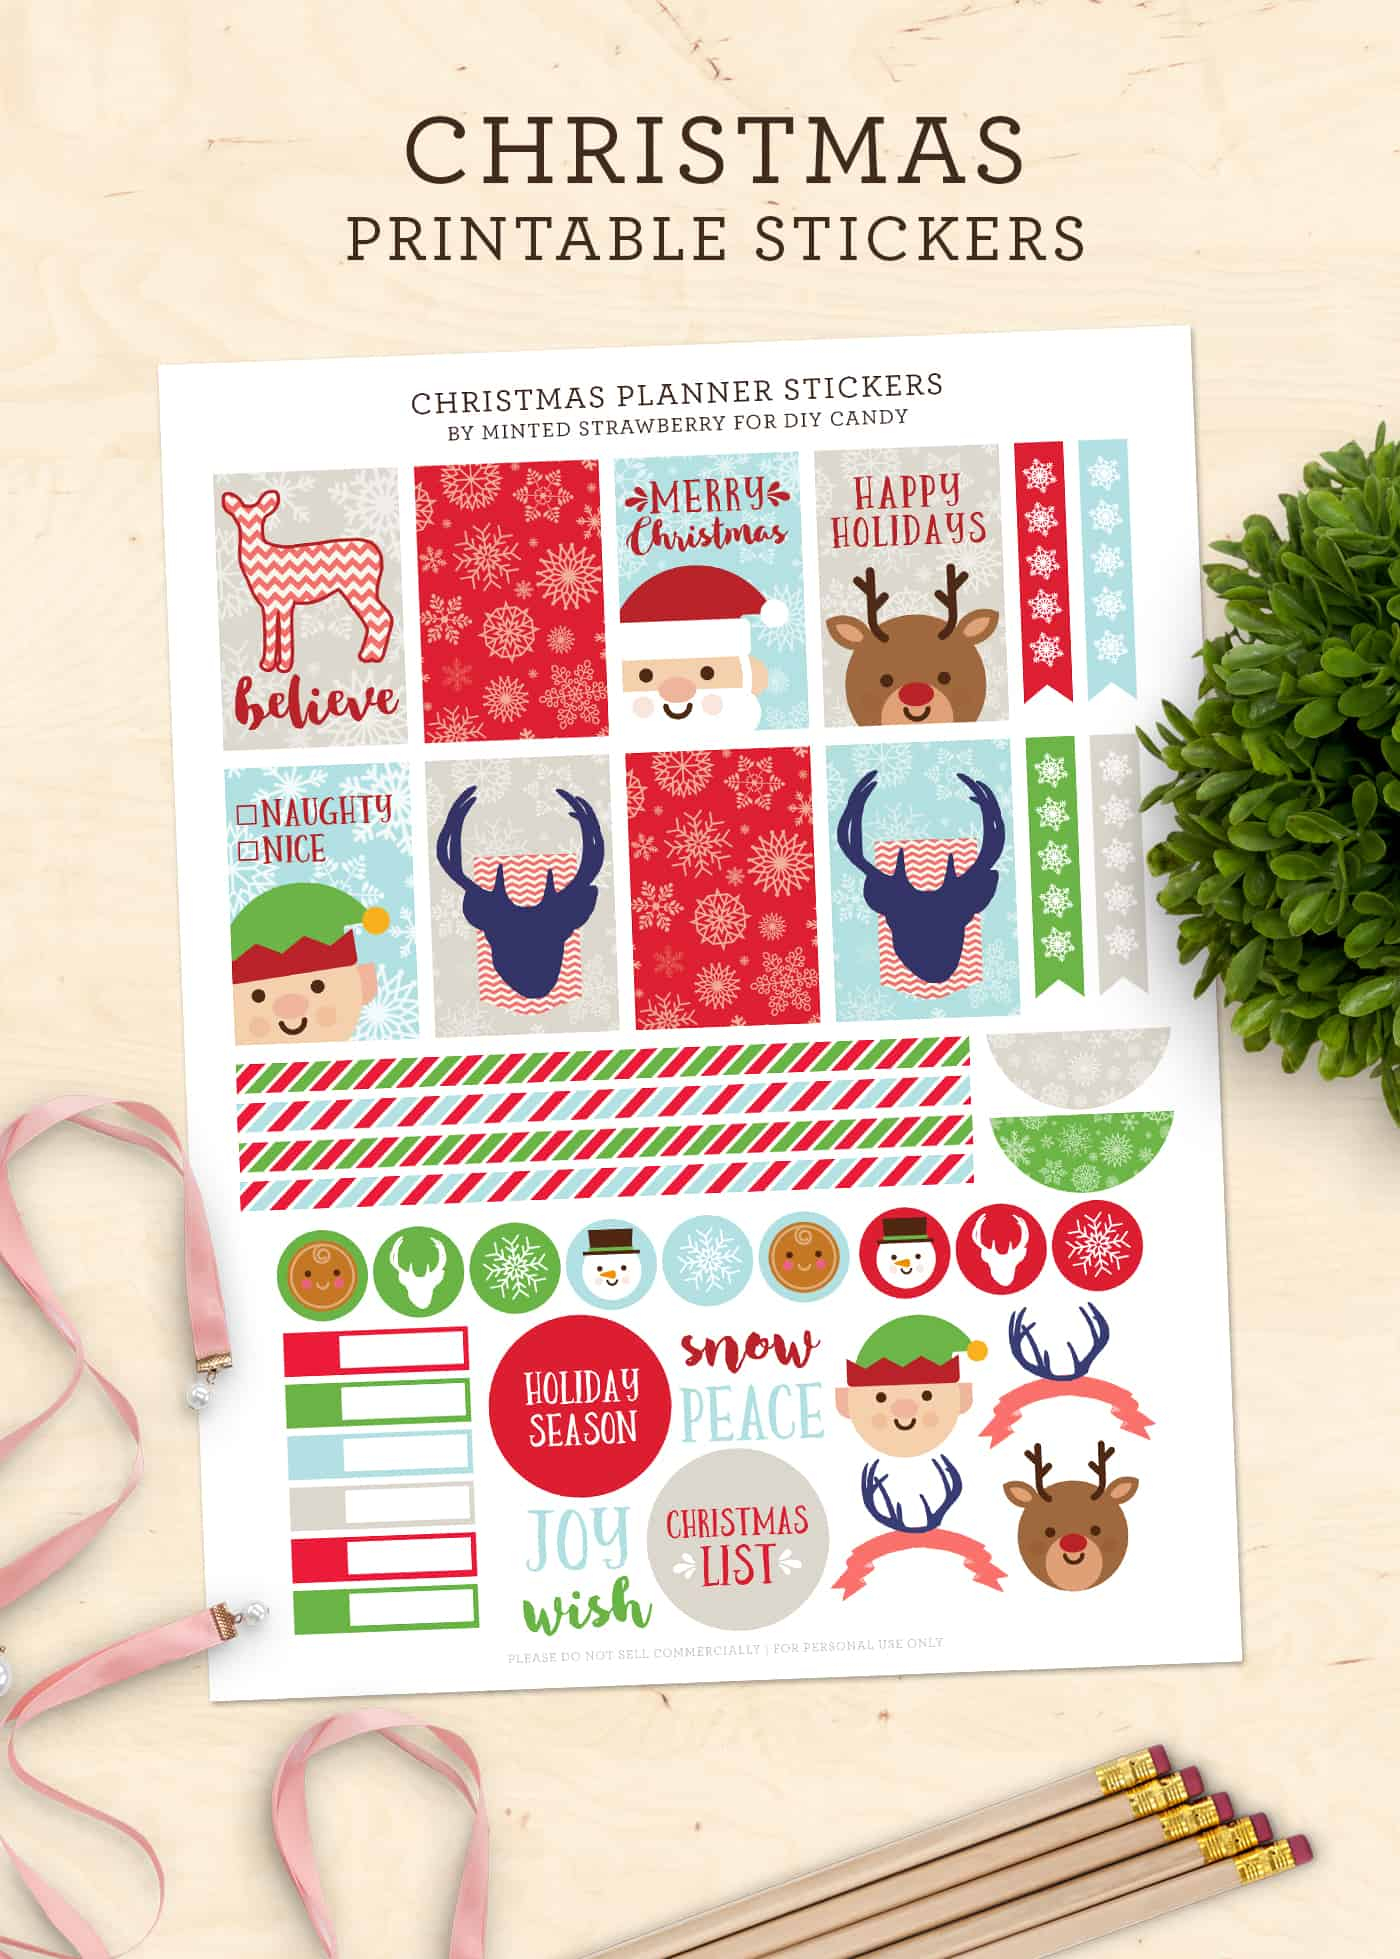 Free Christmas Stickers For Your Planner (Printable!) - Diy Candy - Free Printable Holiday Stickers